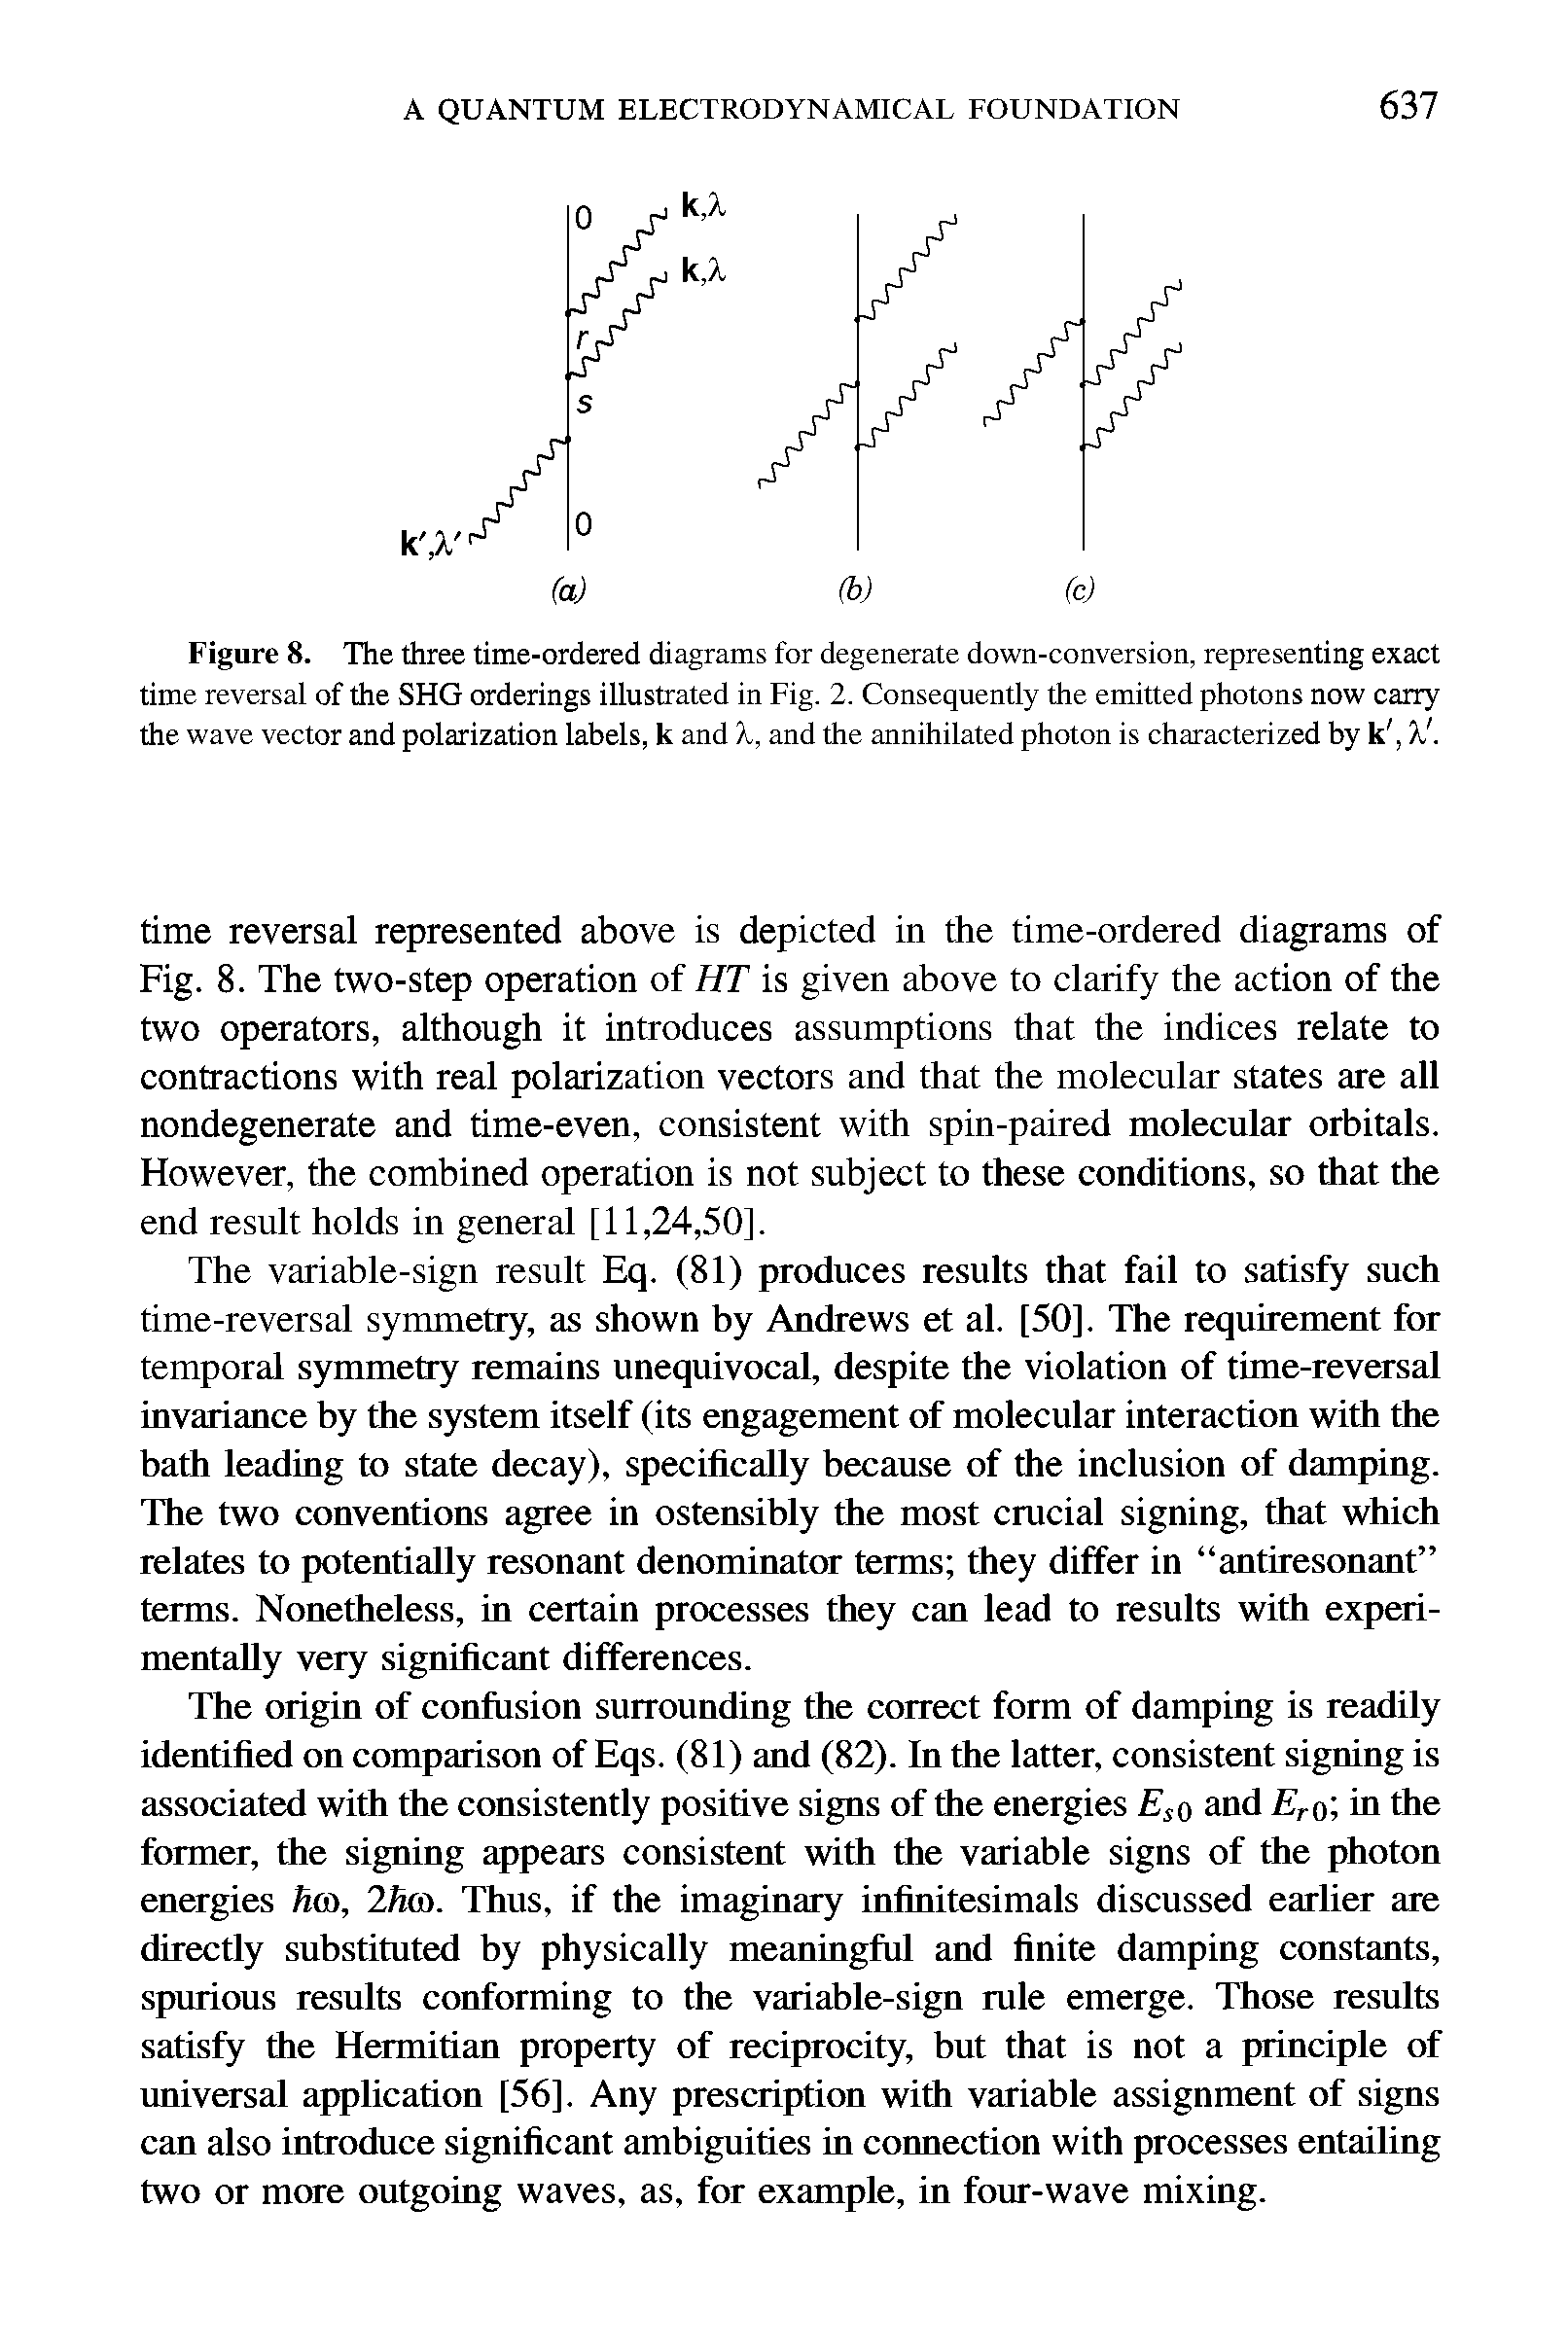 Figure 8. The three time-ordered diagrams for degenerate down-conversion, representing exact time reversal of the SHG orderings illustrated in Fig. 2. Consequently the emitted photons now carry the wave vector and polarization labels, k and X, and the annihilated photon is characterized by k X. ...